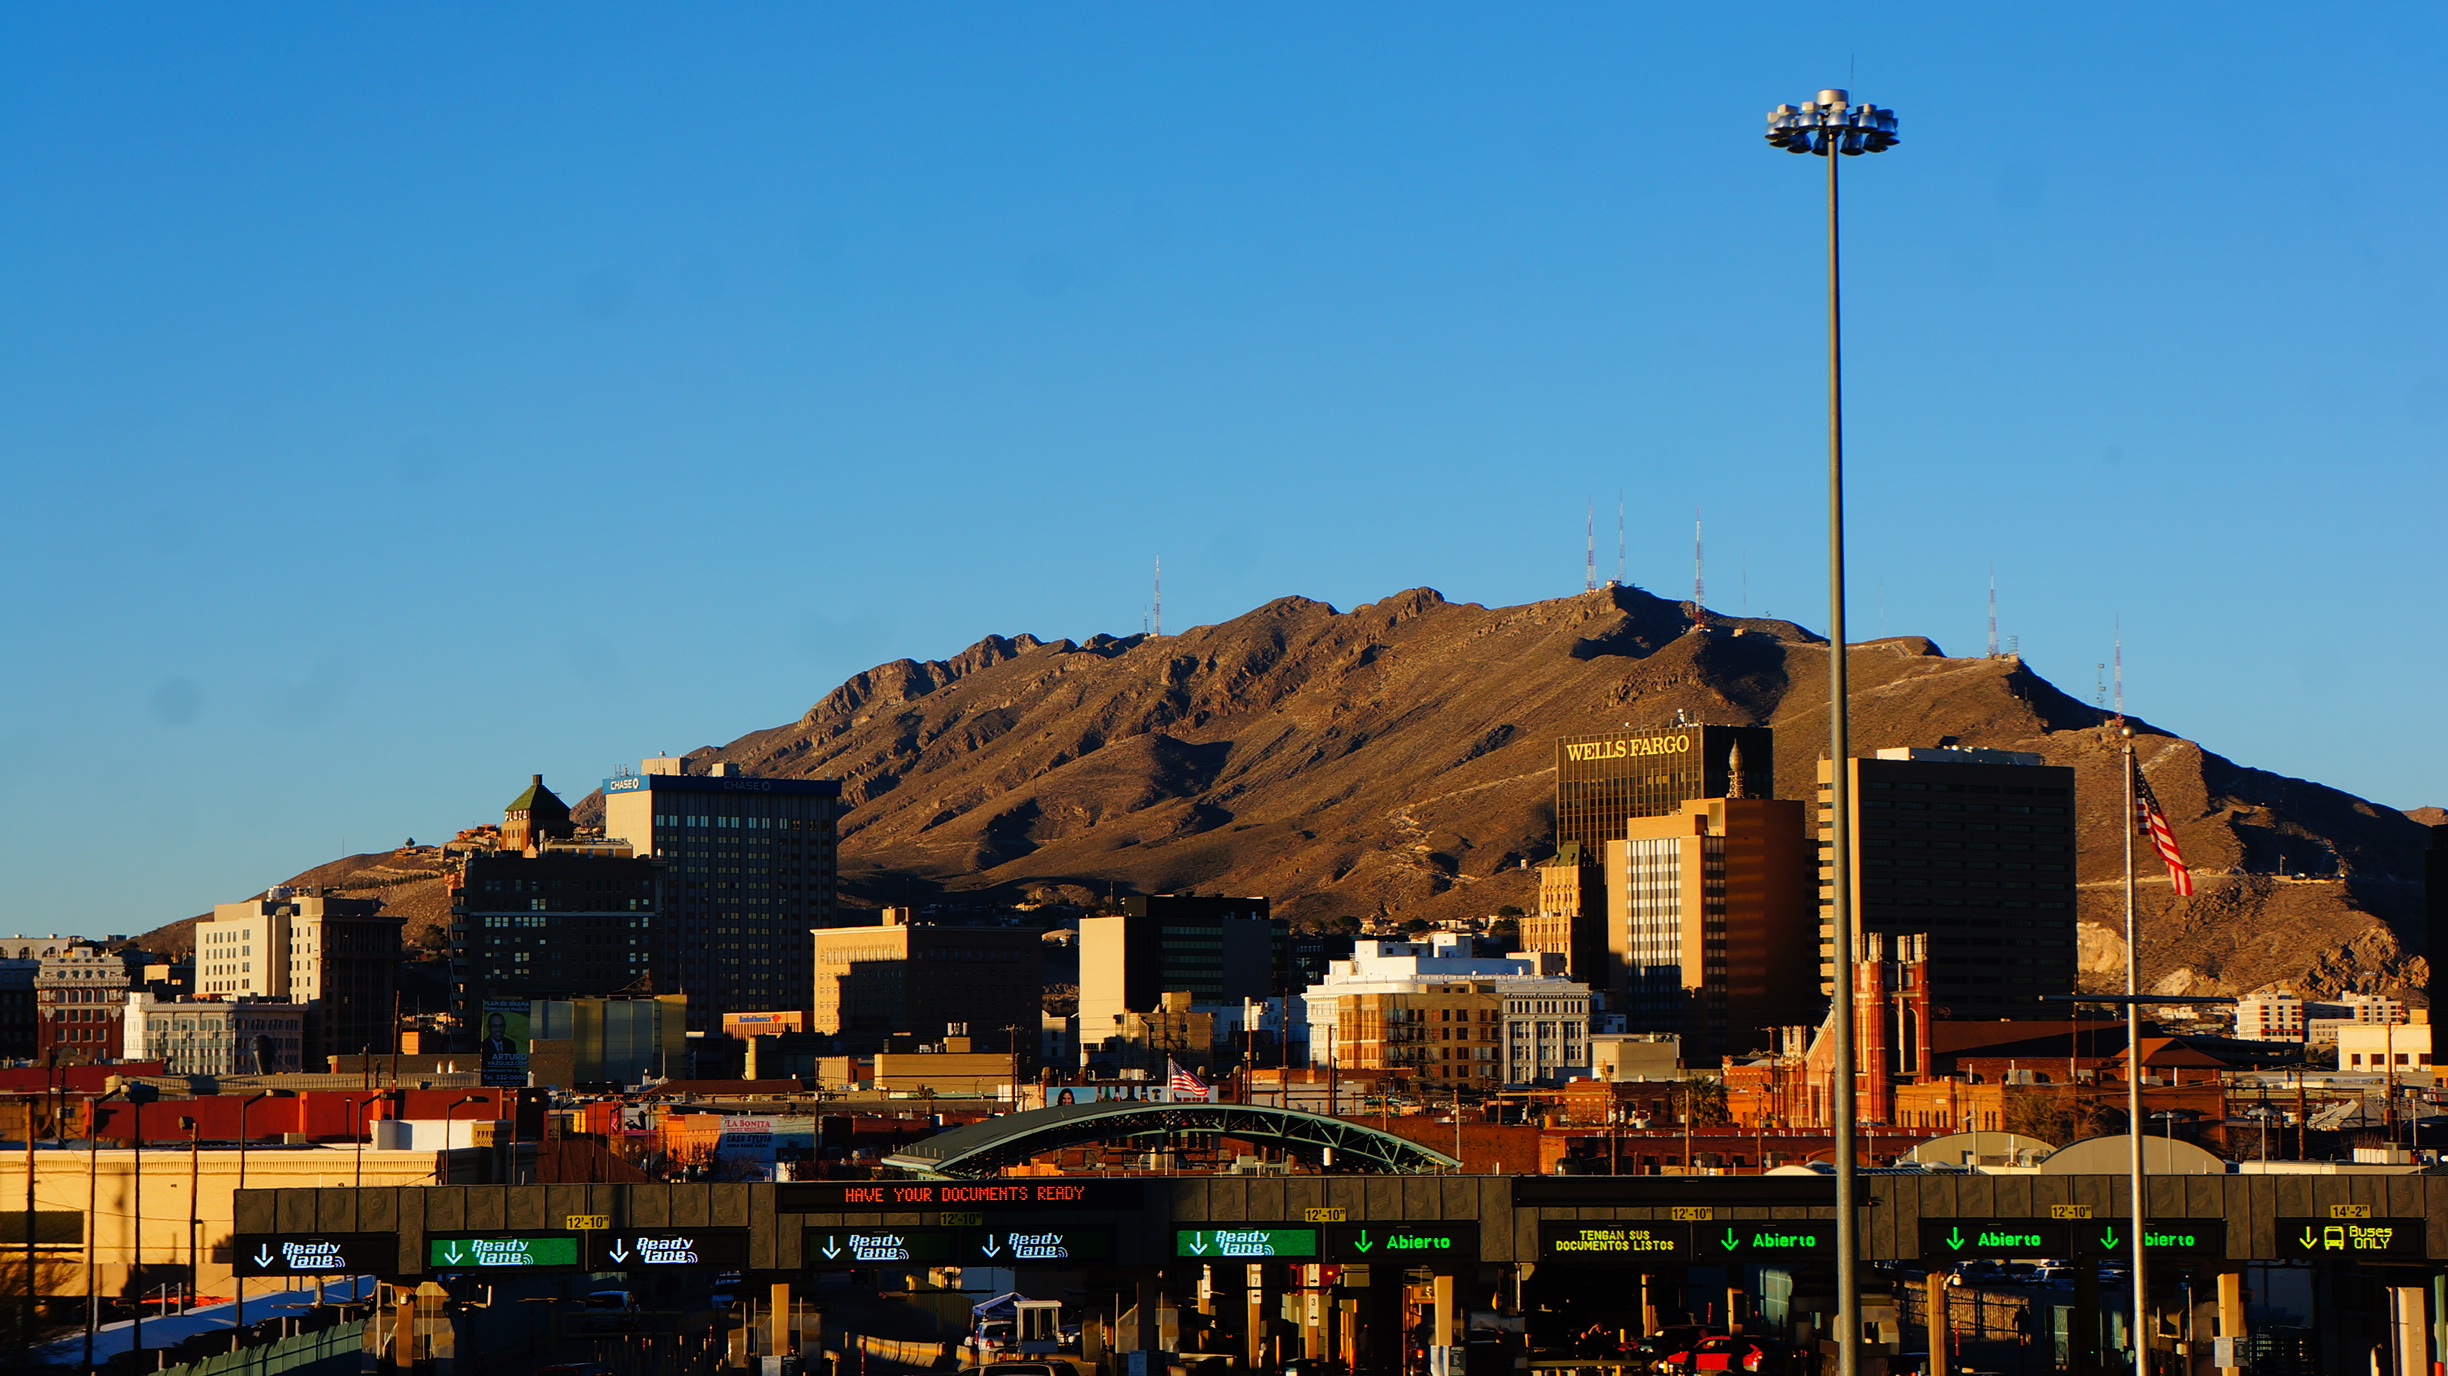 A view of El Paso and the Rocky Mountains from the US-Mexican border. (Kevin Lees)